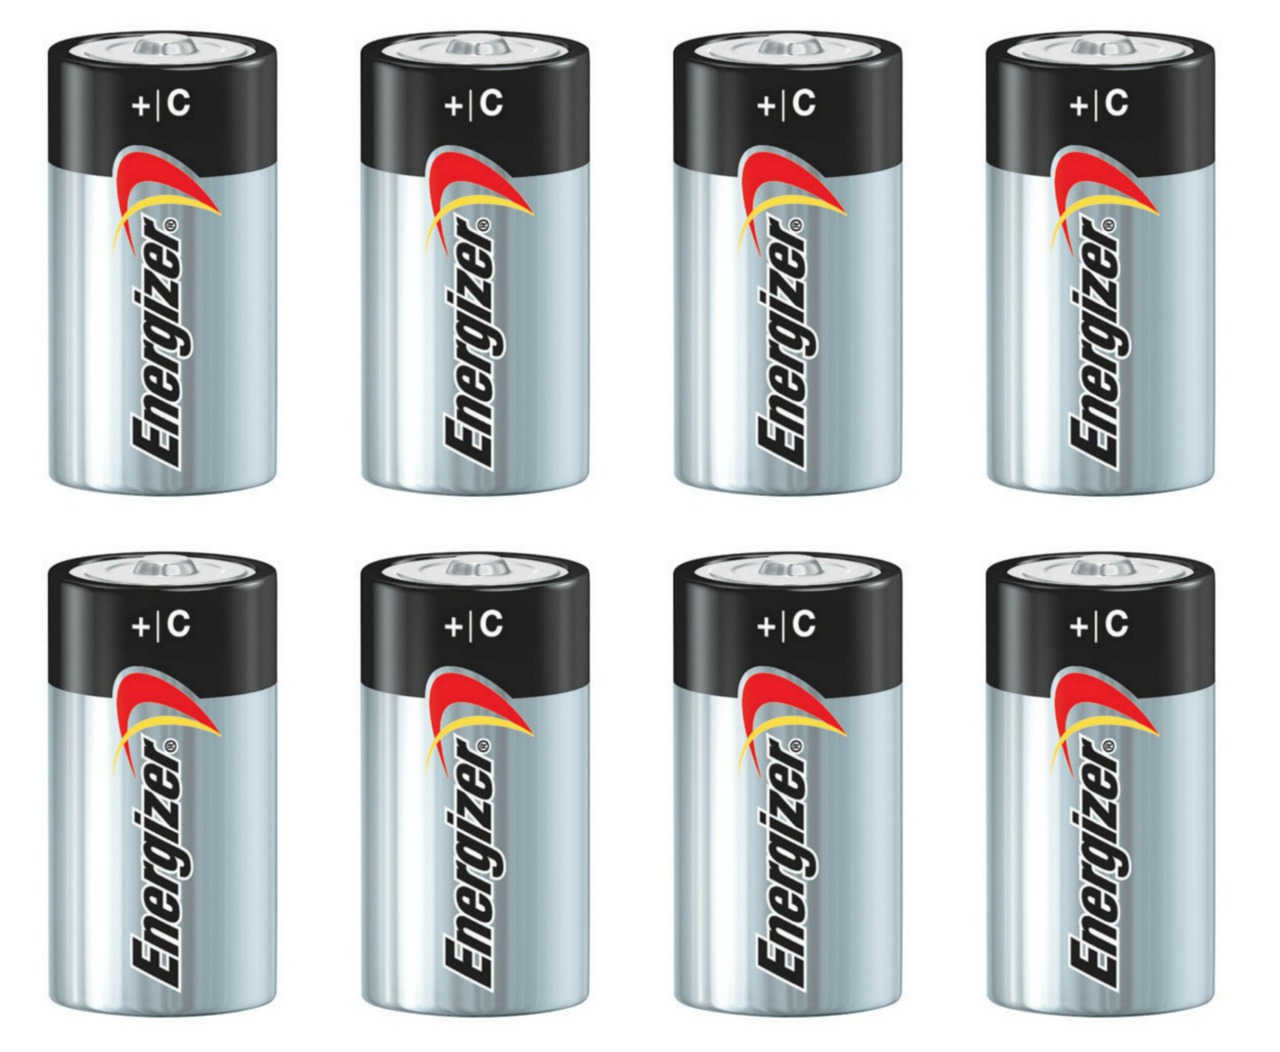 Energizer Max Alkaline C Size Batteries E93 - 8 Pack + FREE SHIPPING!